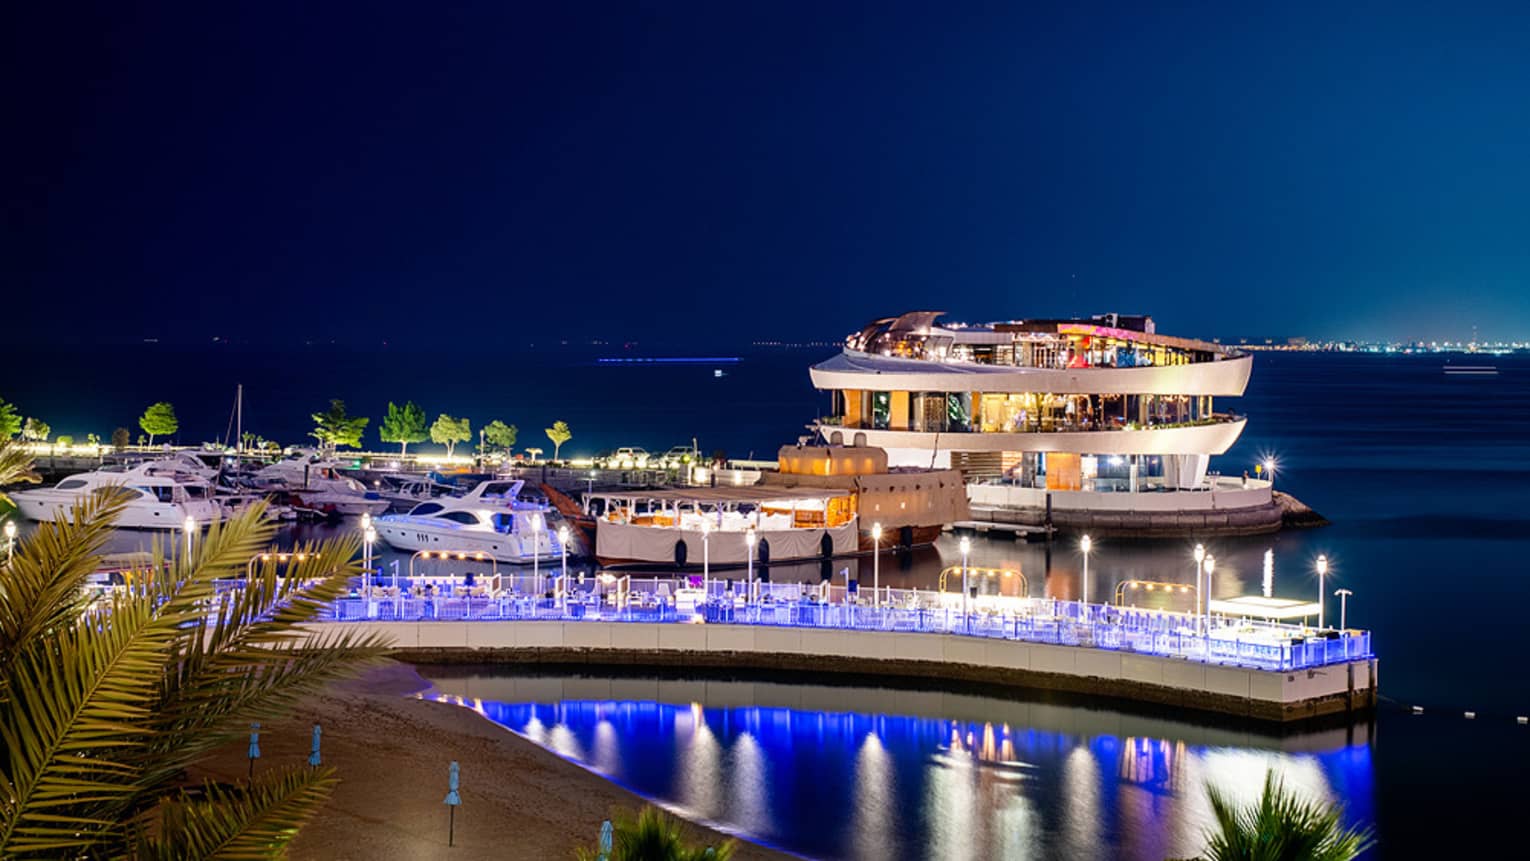 A dock covered in blue lights with a floating restaurant in the bay behind it.